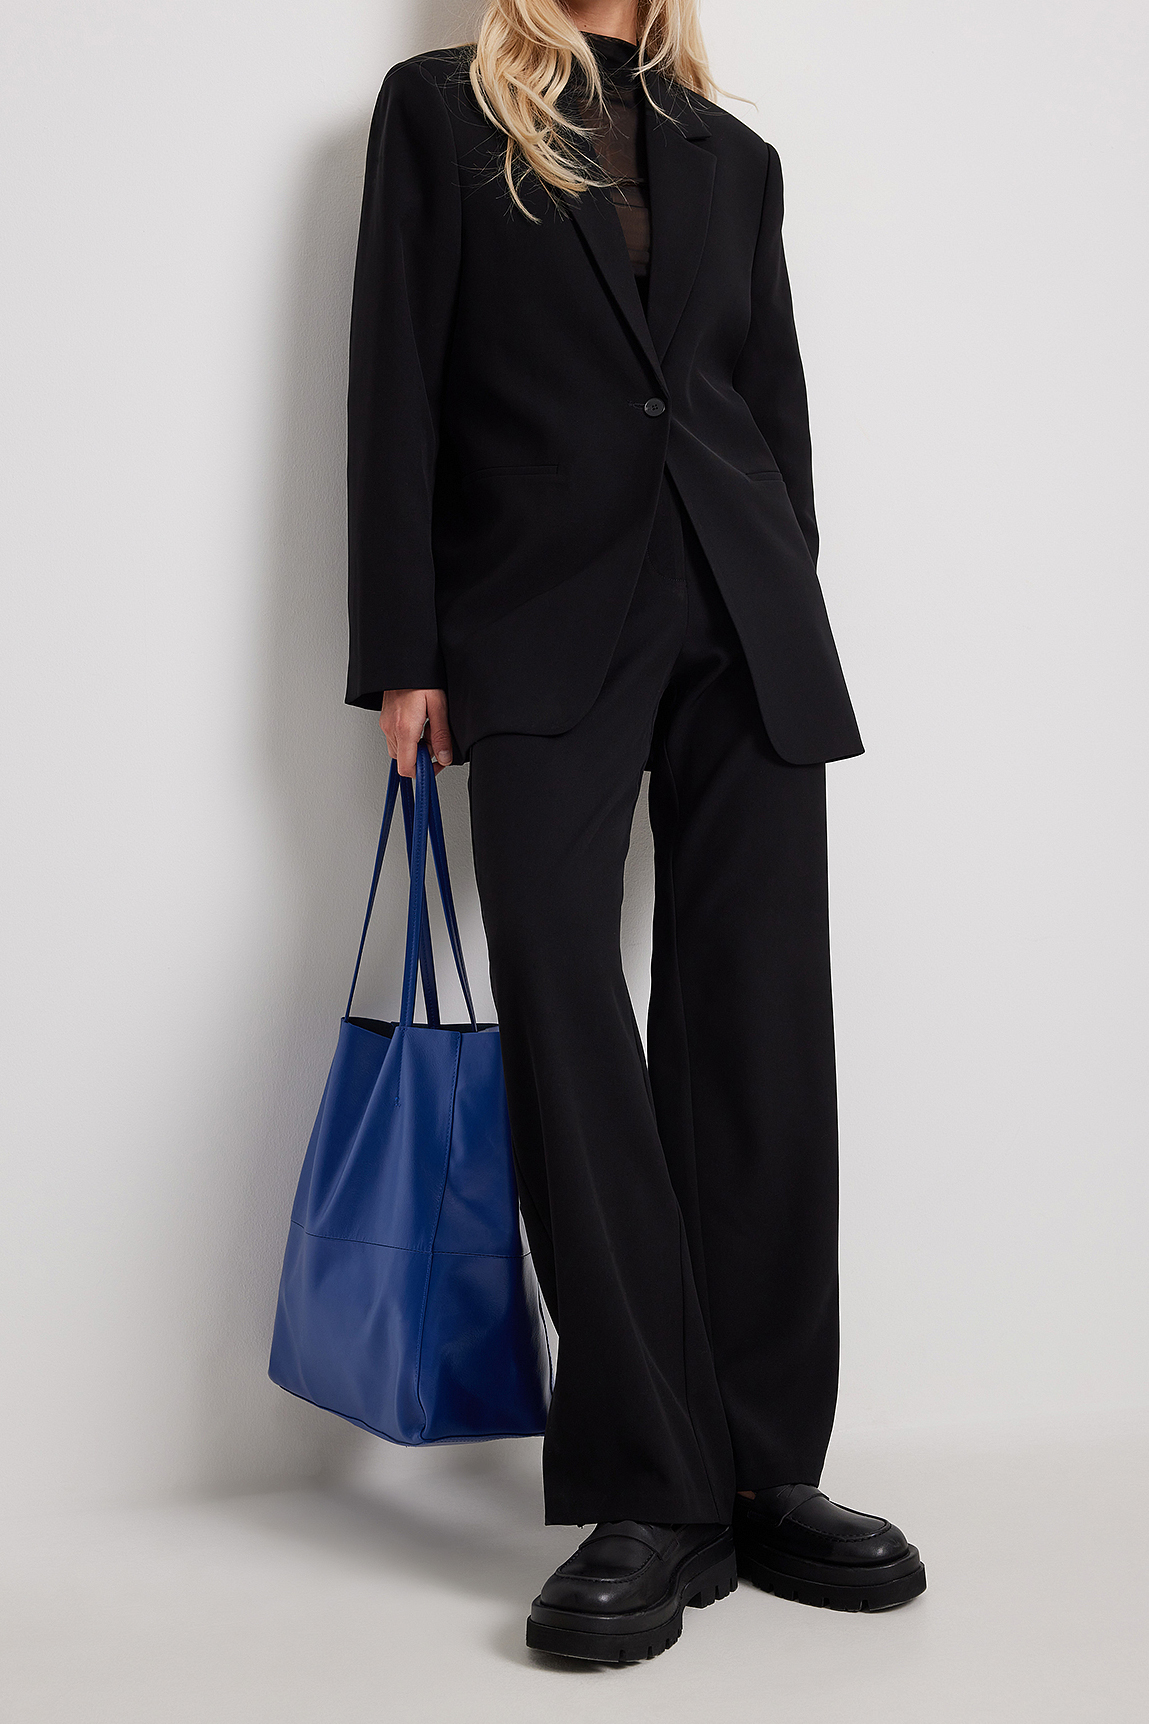 Cobalt Blue Glossy Patent Leather Tote